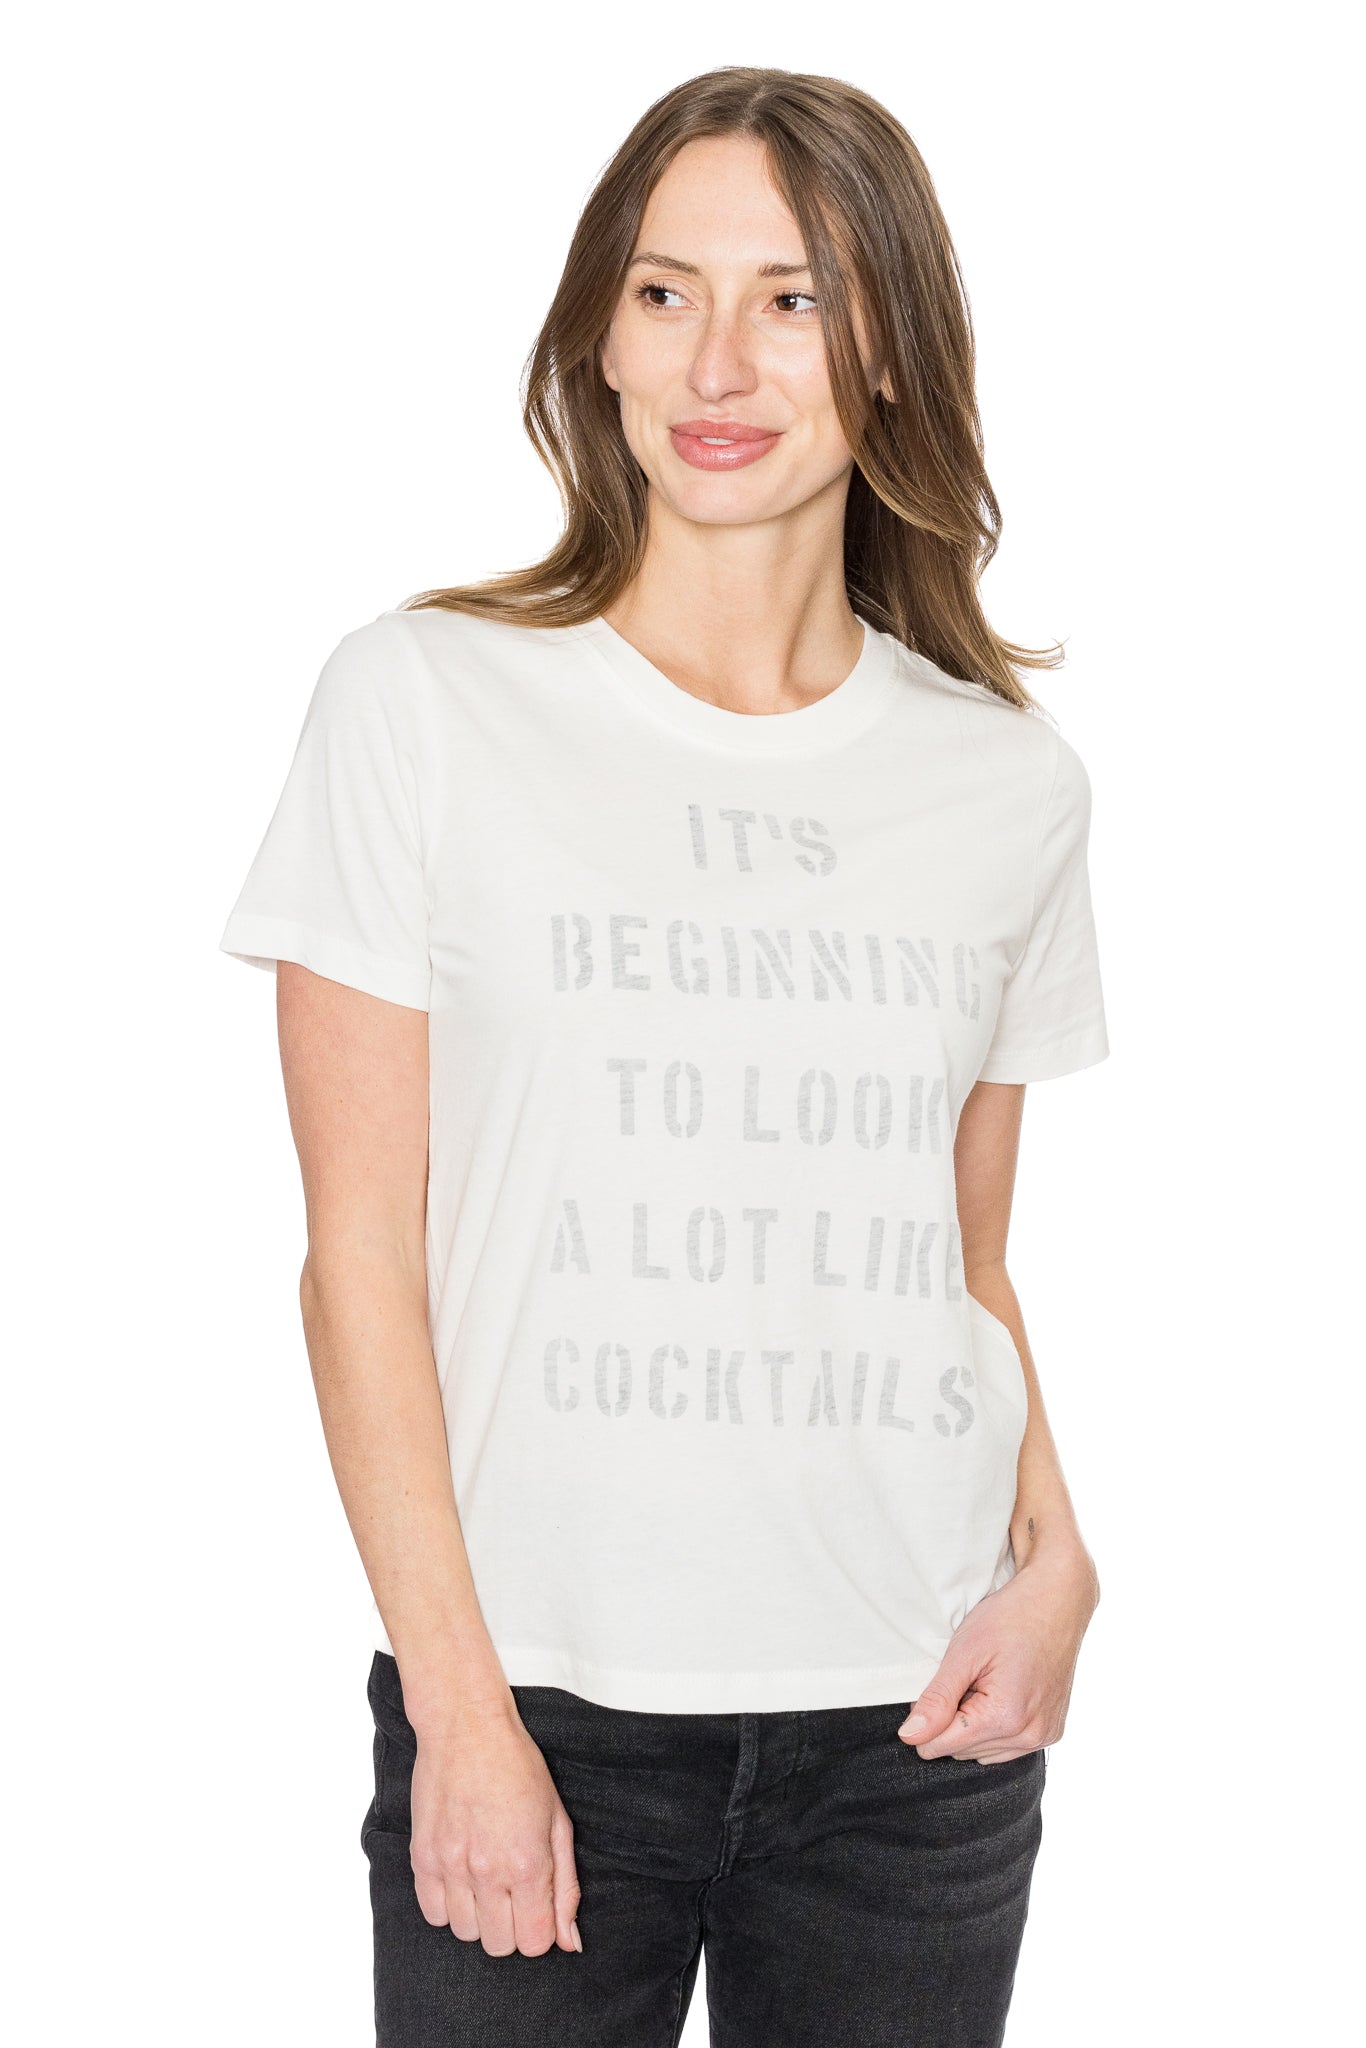 Cocktails Tee by Sol Los Angeles